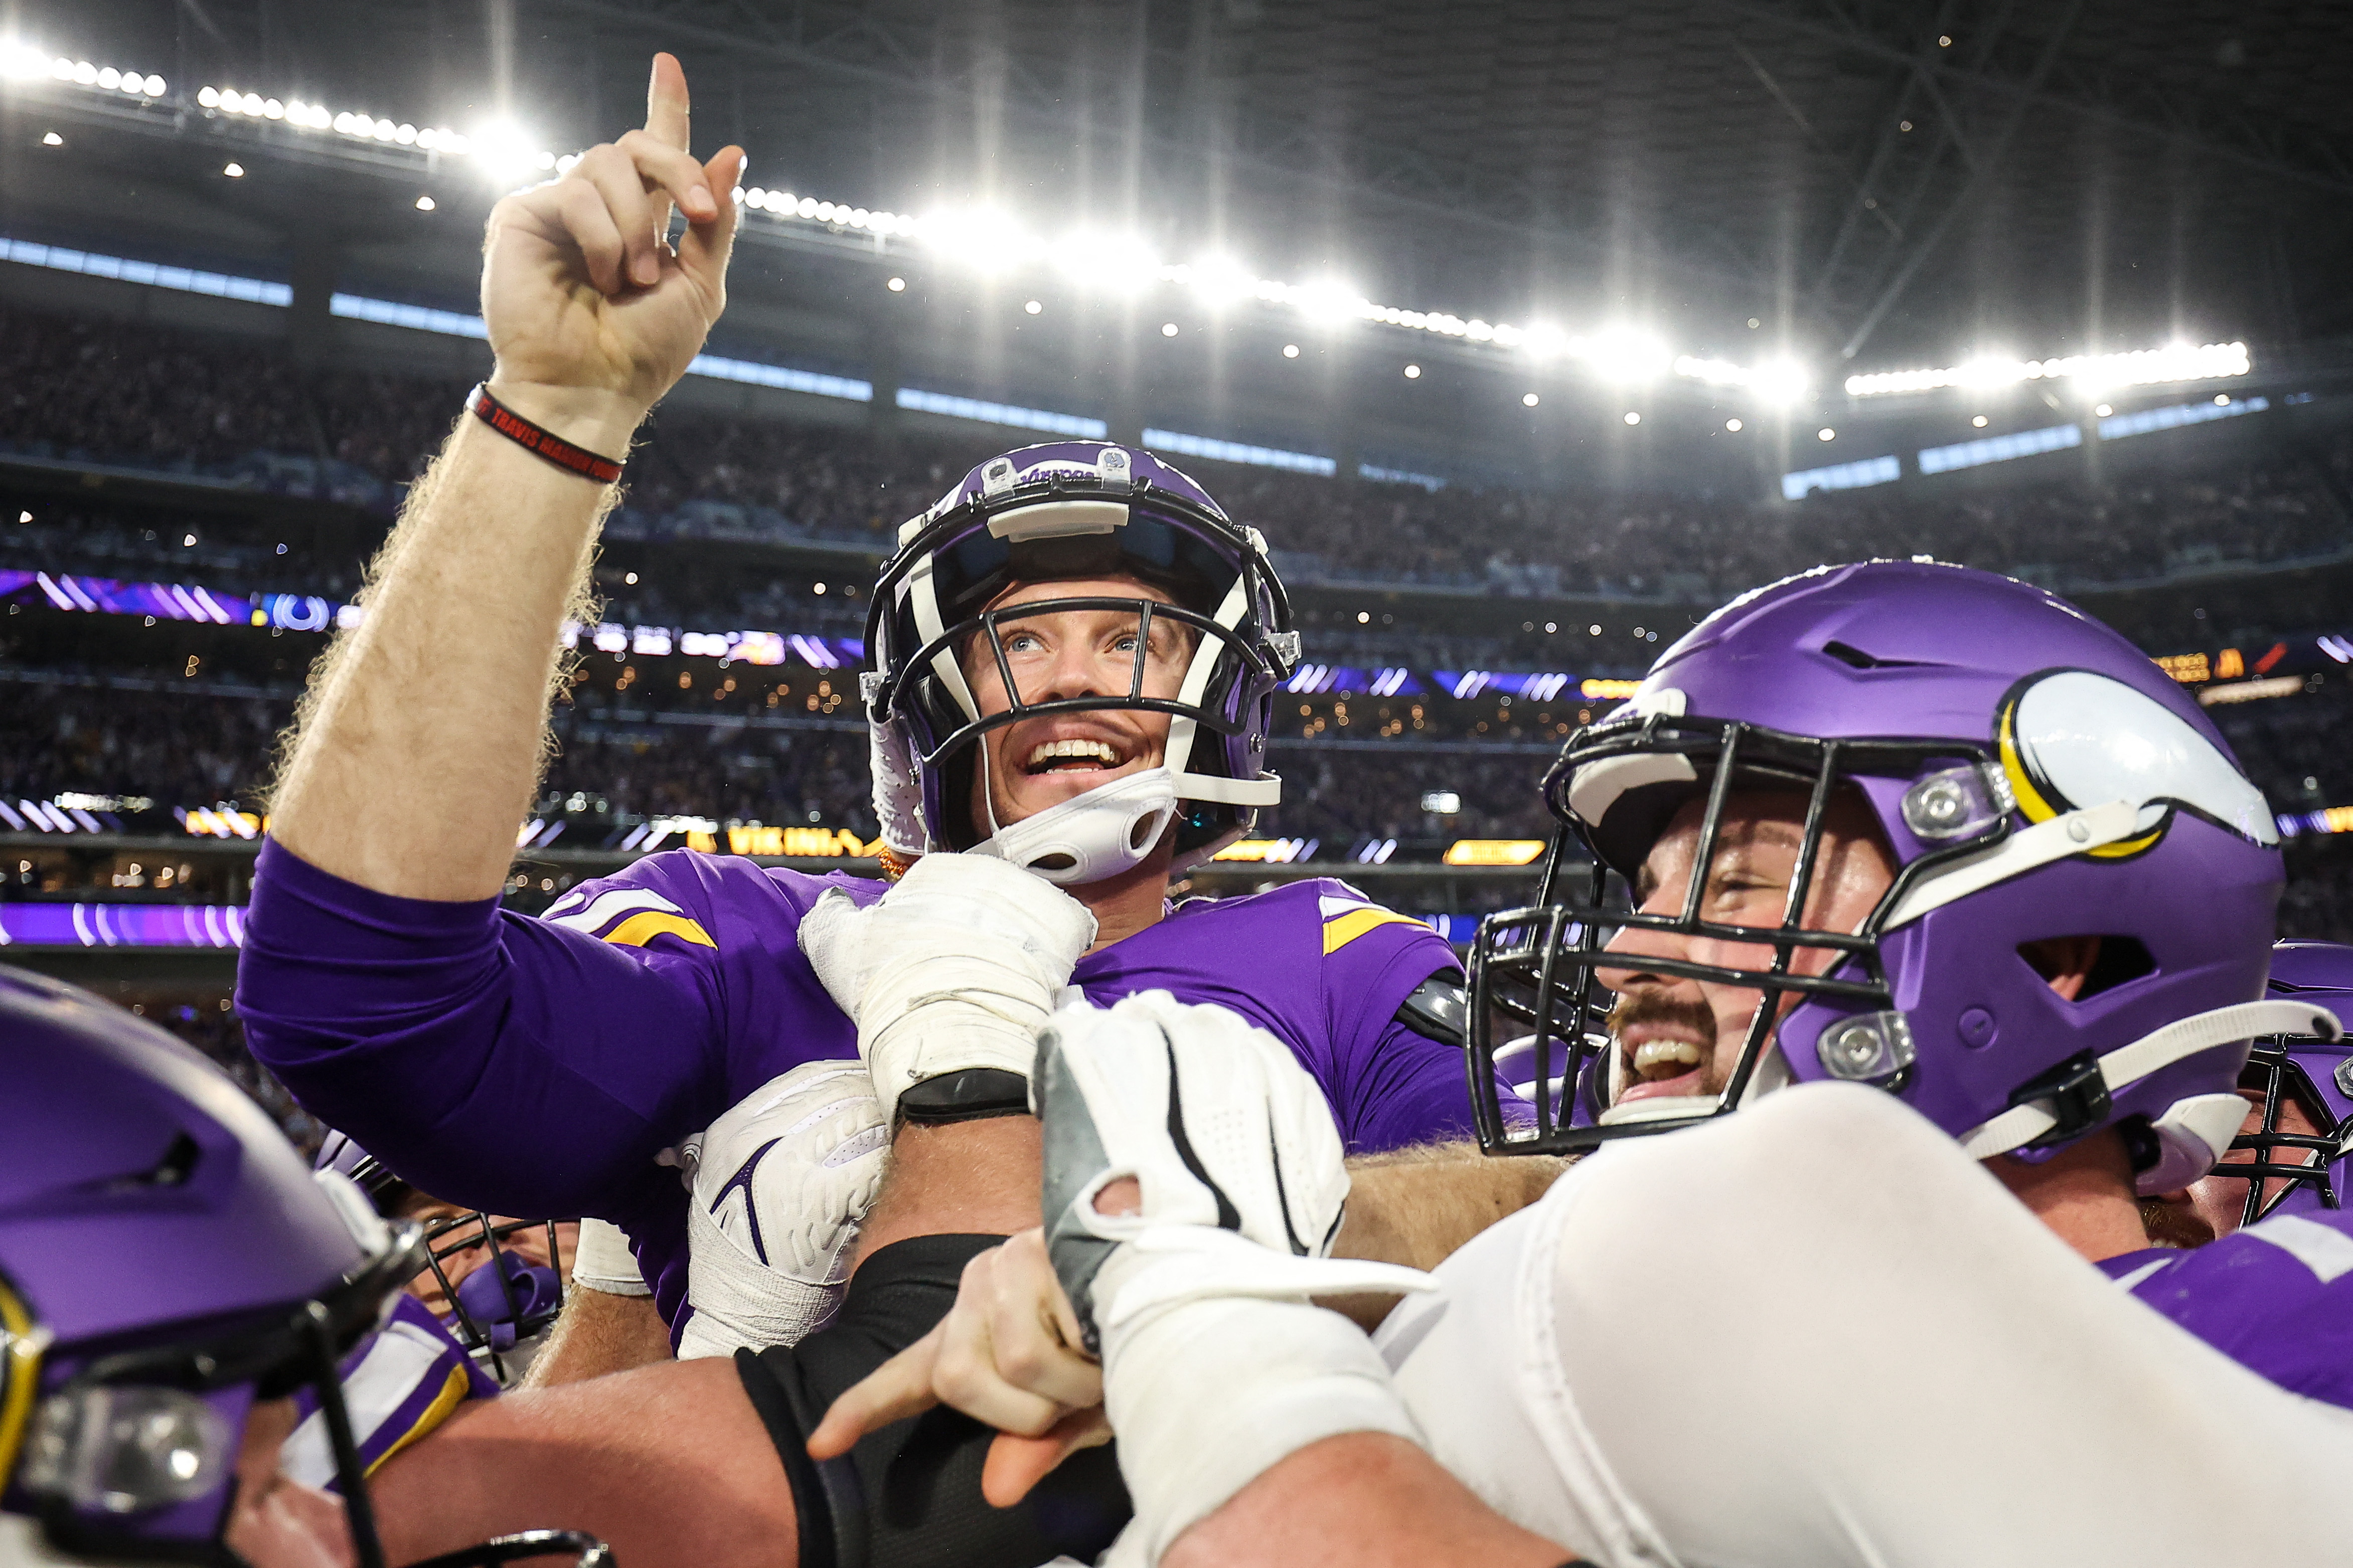 Vikings complete largest comeback in NFL history to beat Colts 39